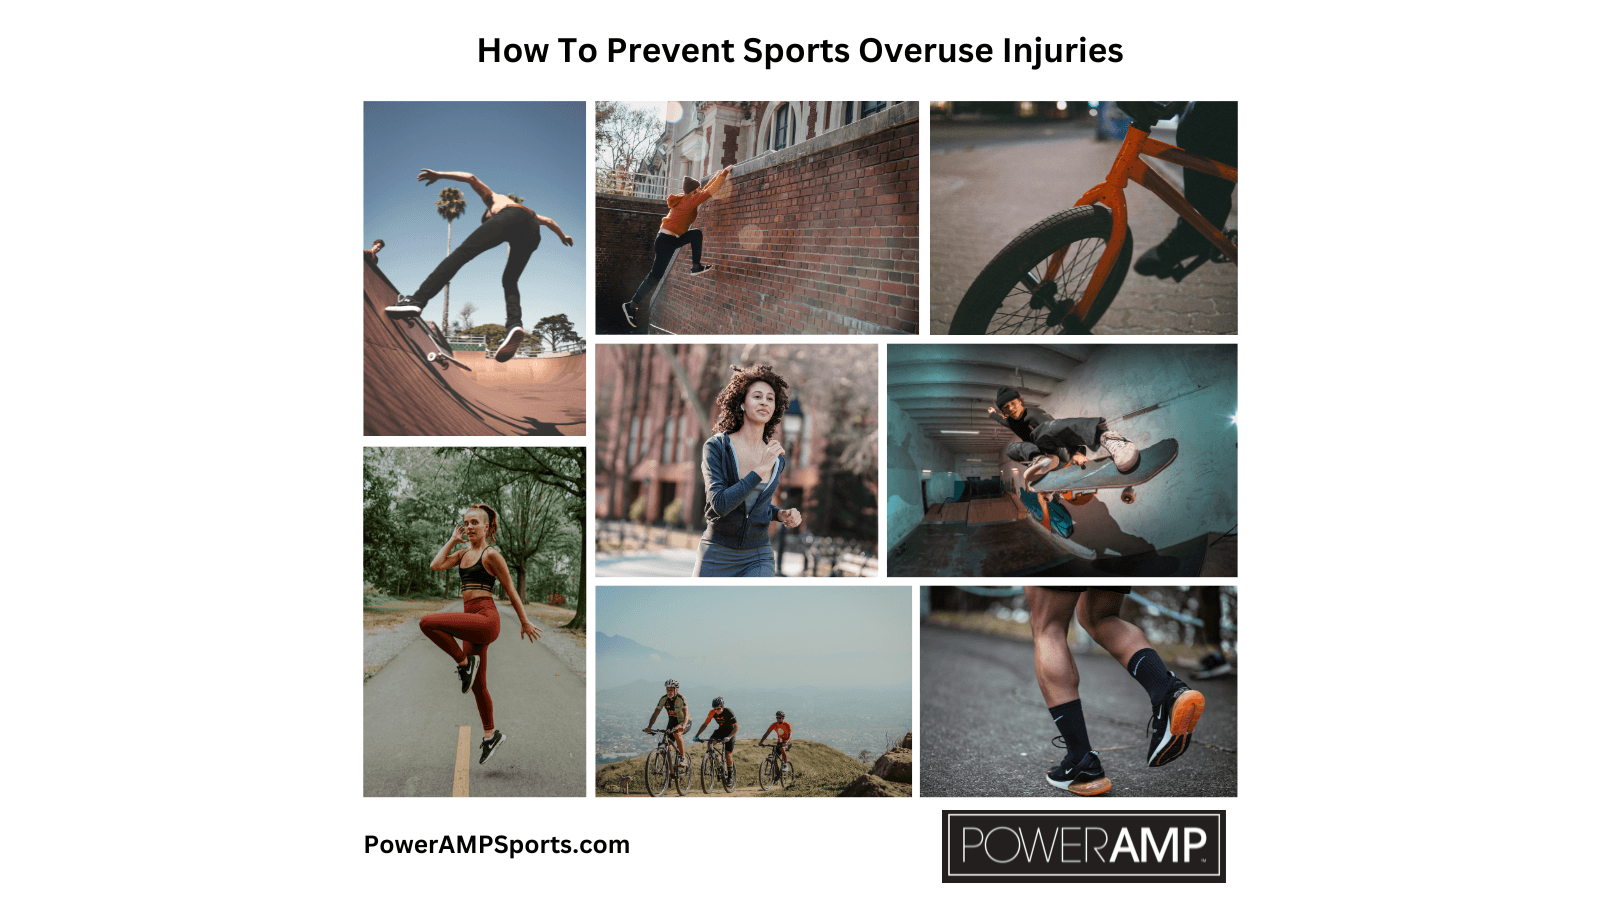 How To Prevent Sports Overuse Injuries